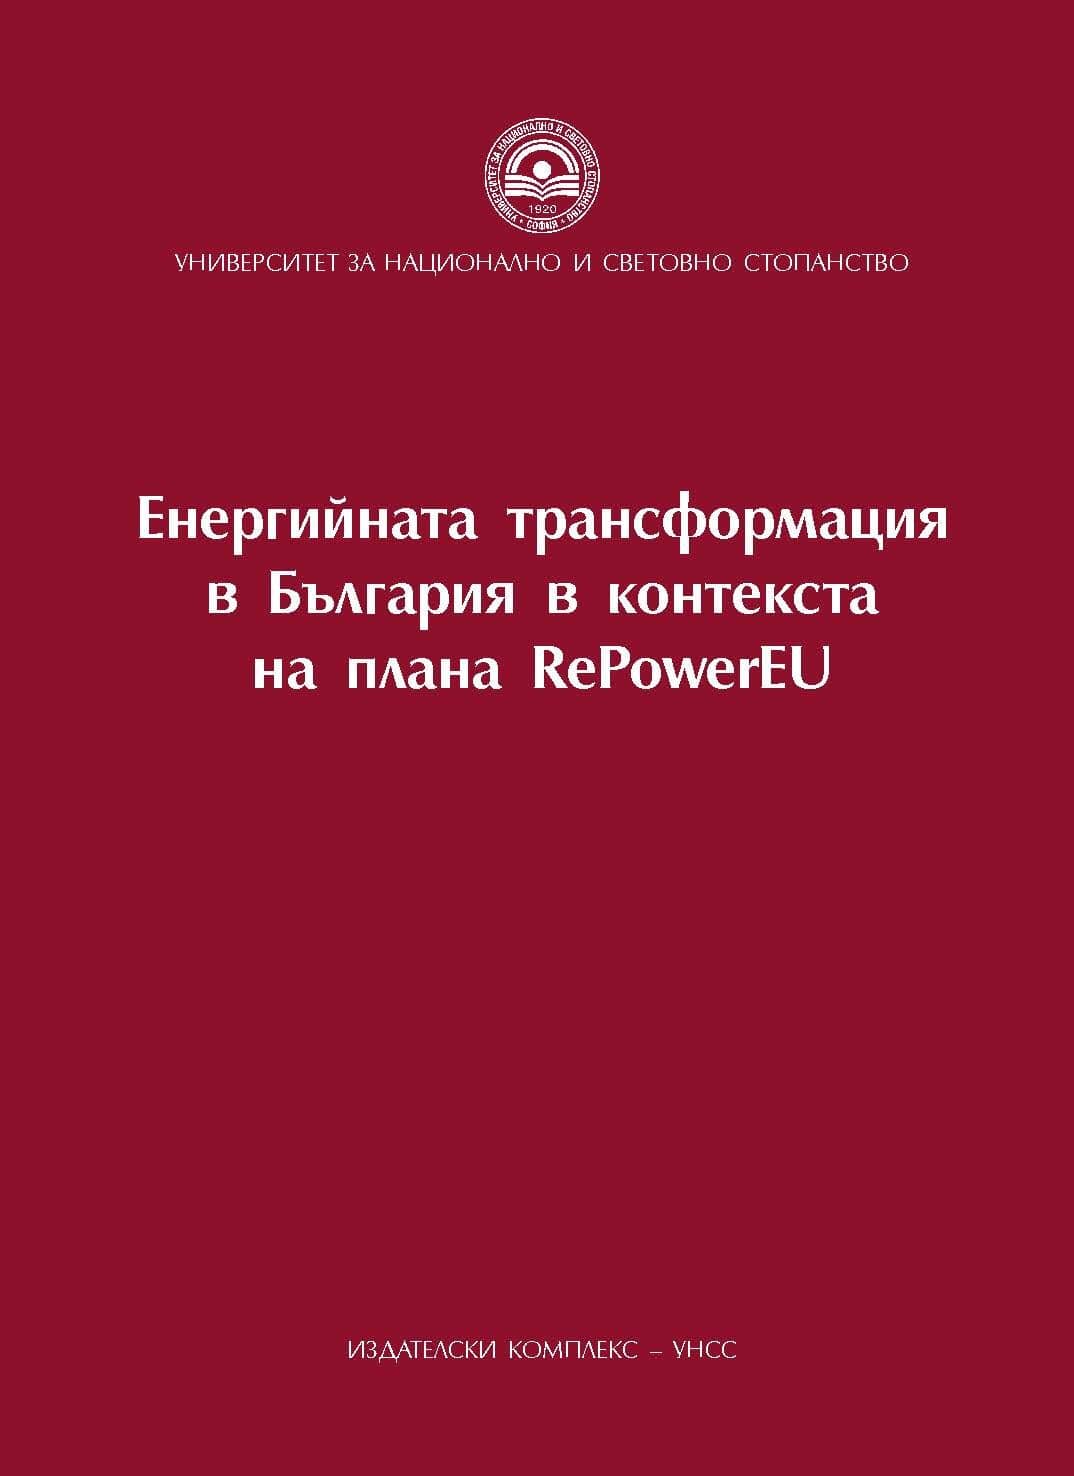 Economic characteristics of Bulgaria's nuclear power industry and its contribution to the decarbonisation of the Economy